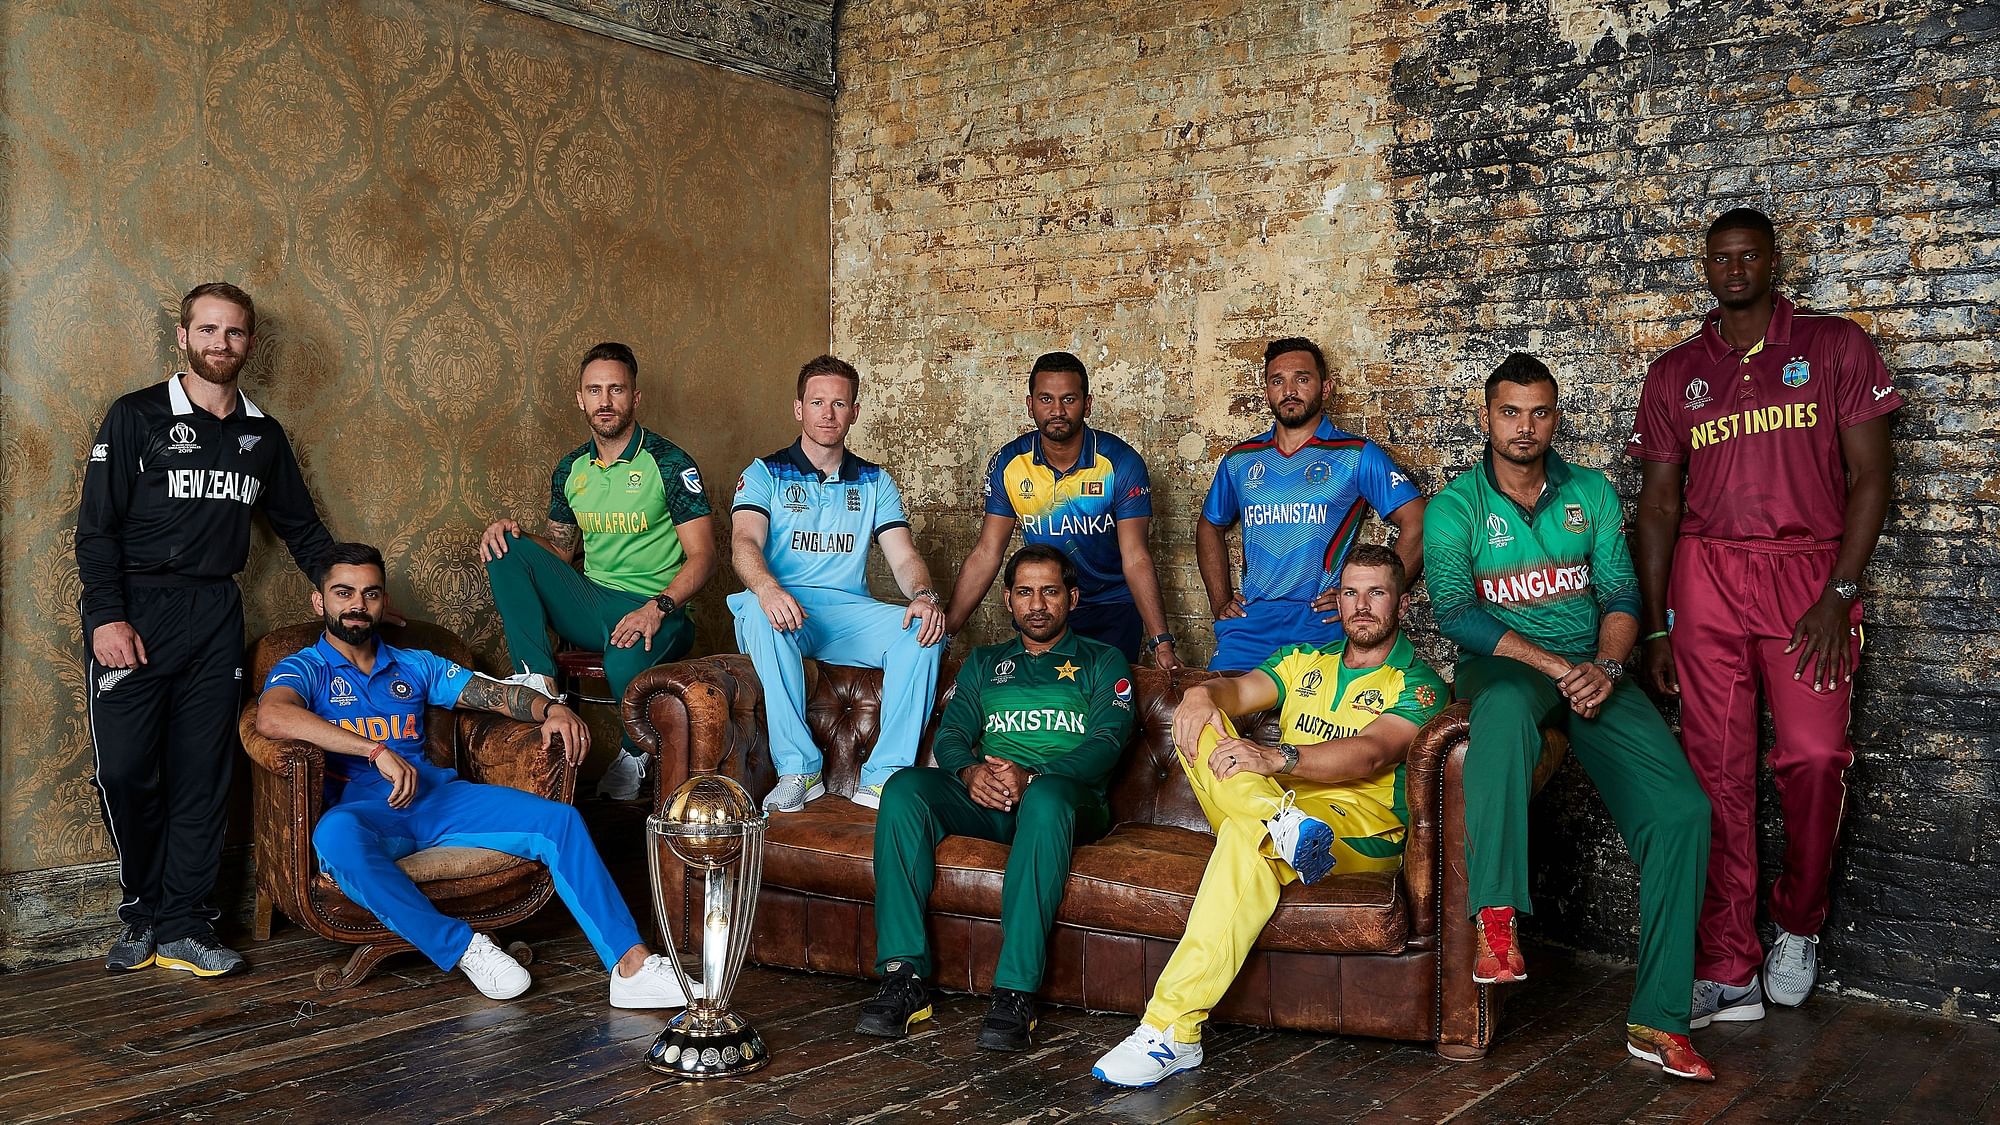 Everything you need to know about the 10 teams competing at the 2019 ICC World Cup.